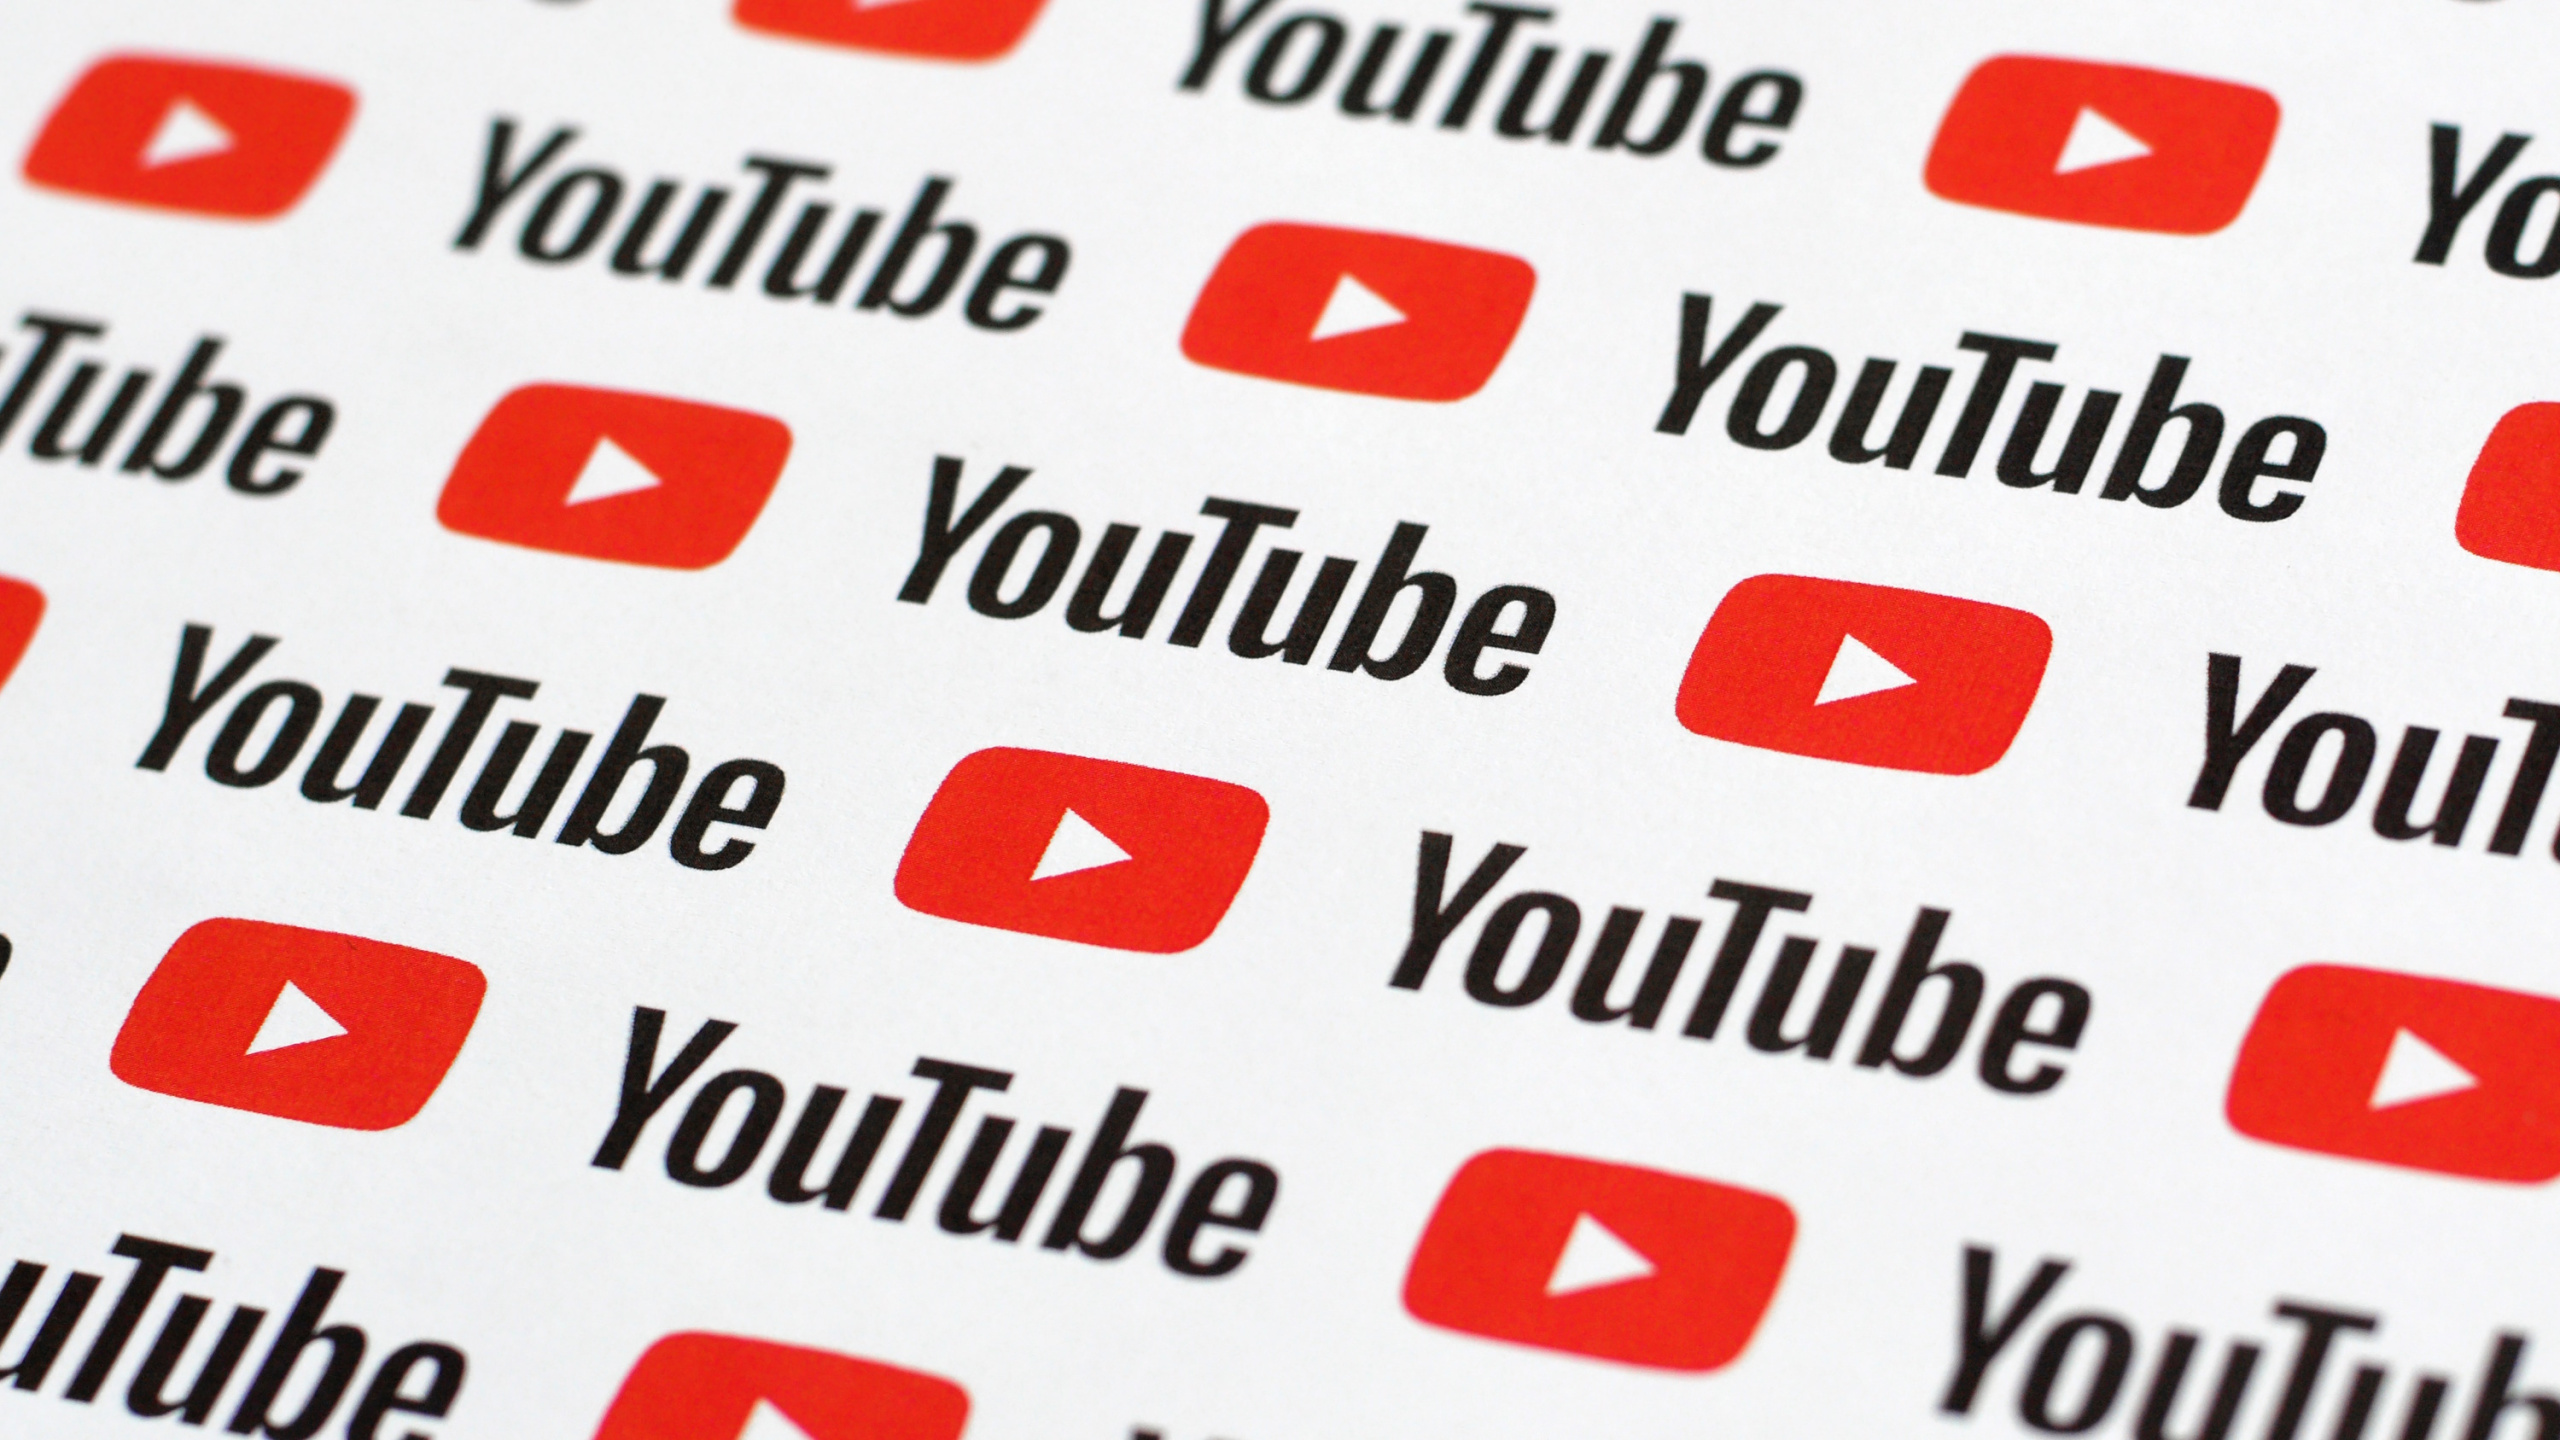 Suboptimal preview, YouTube’s new weapon against ad blockers